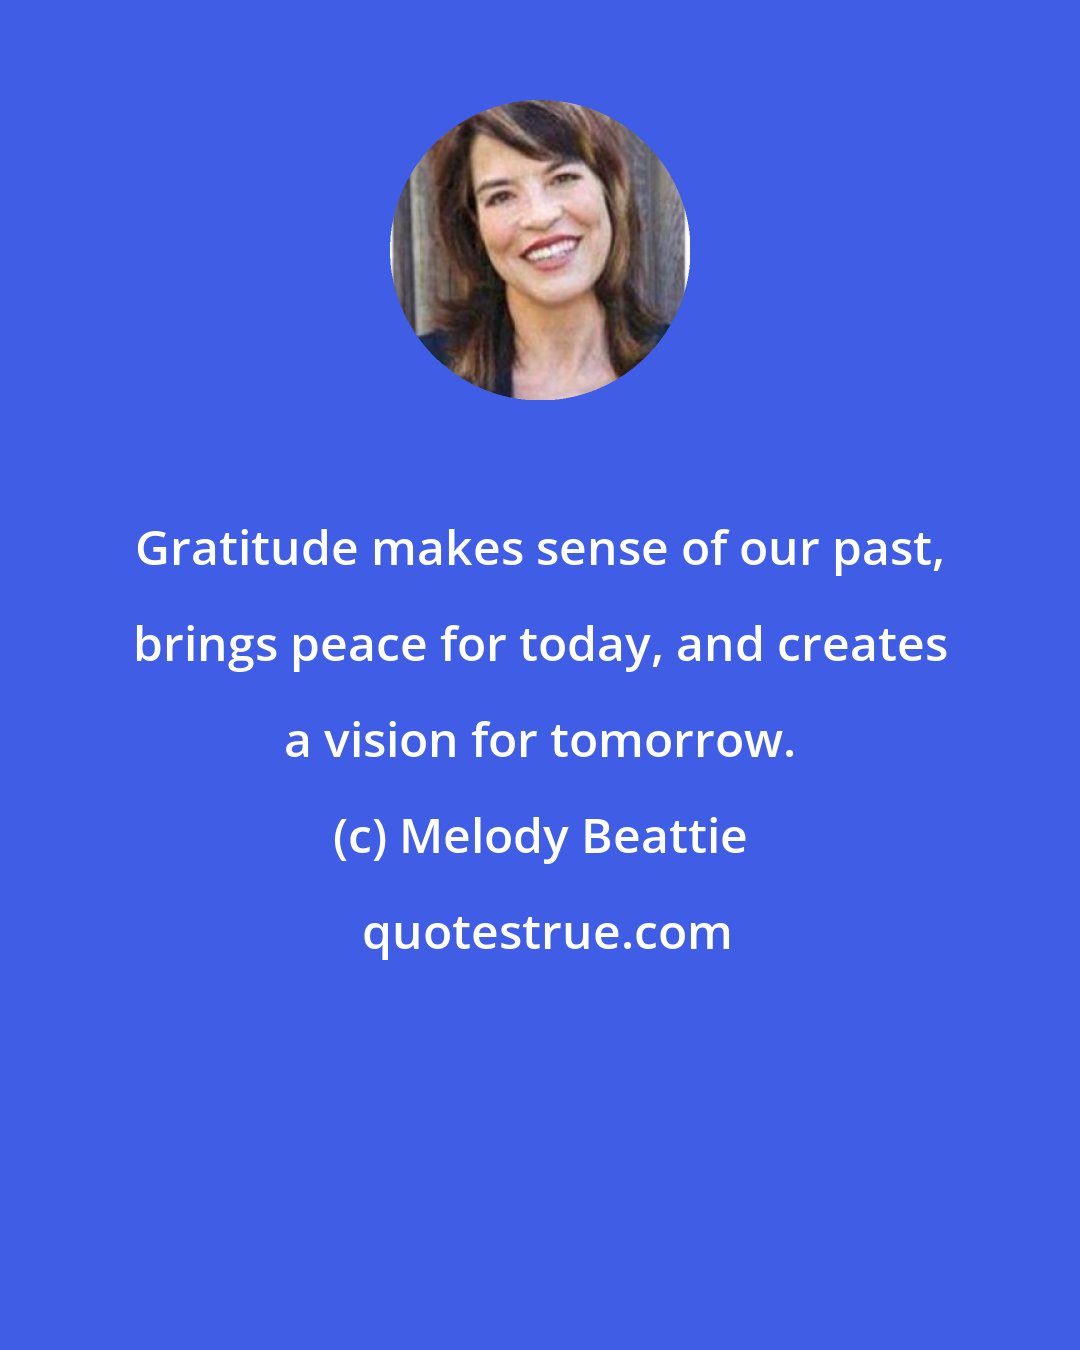 Melody Beattie: Gratitude makes sense of our past, brings peace for today, and creates a vision for tomorrow.